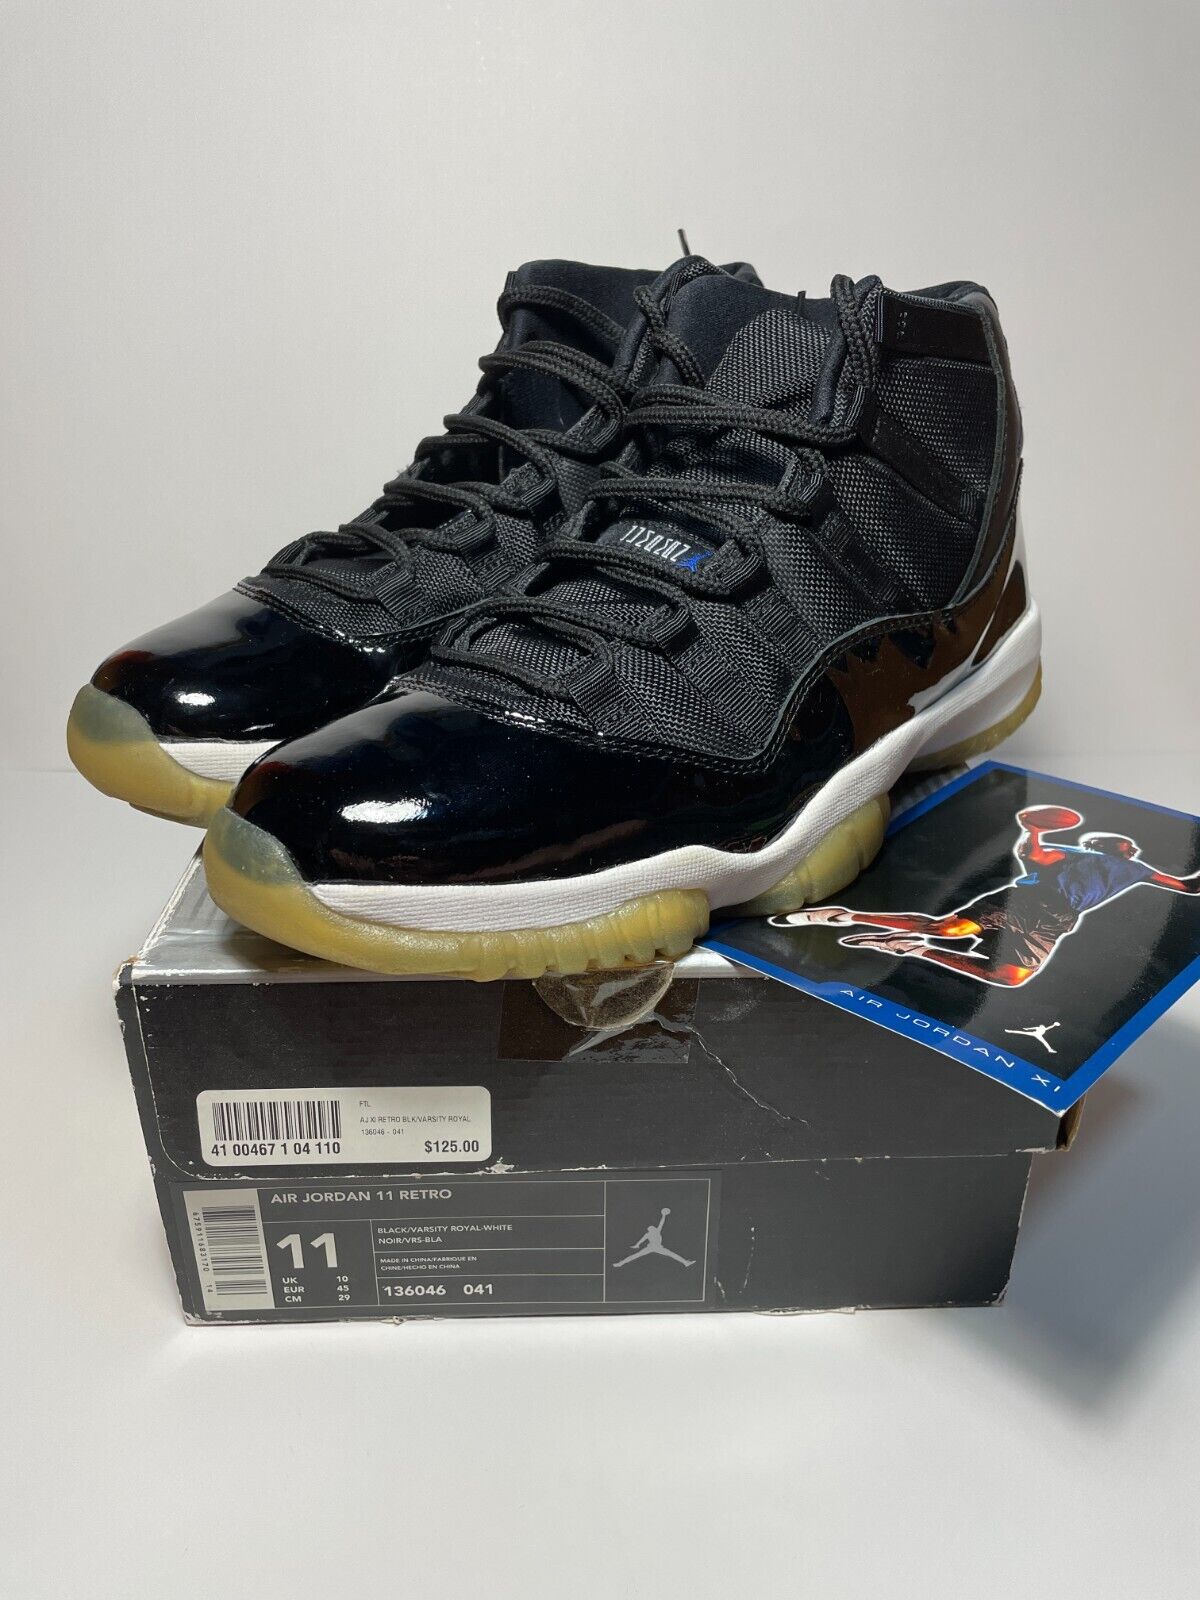 Jordan Brand sampled up a not-so-different1 "Space Jam" 2000 retro (photo: thepriceisright326)
